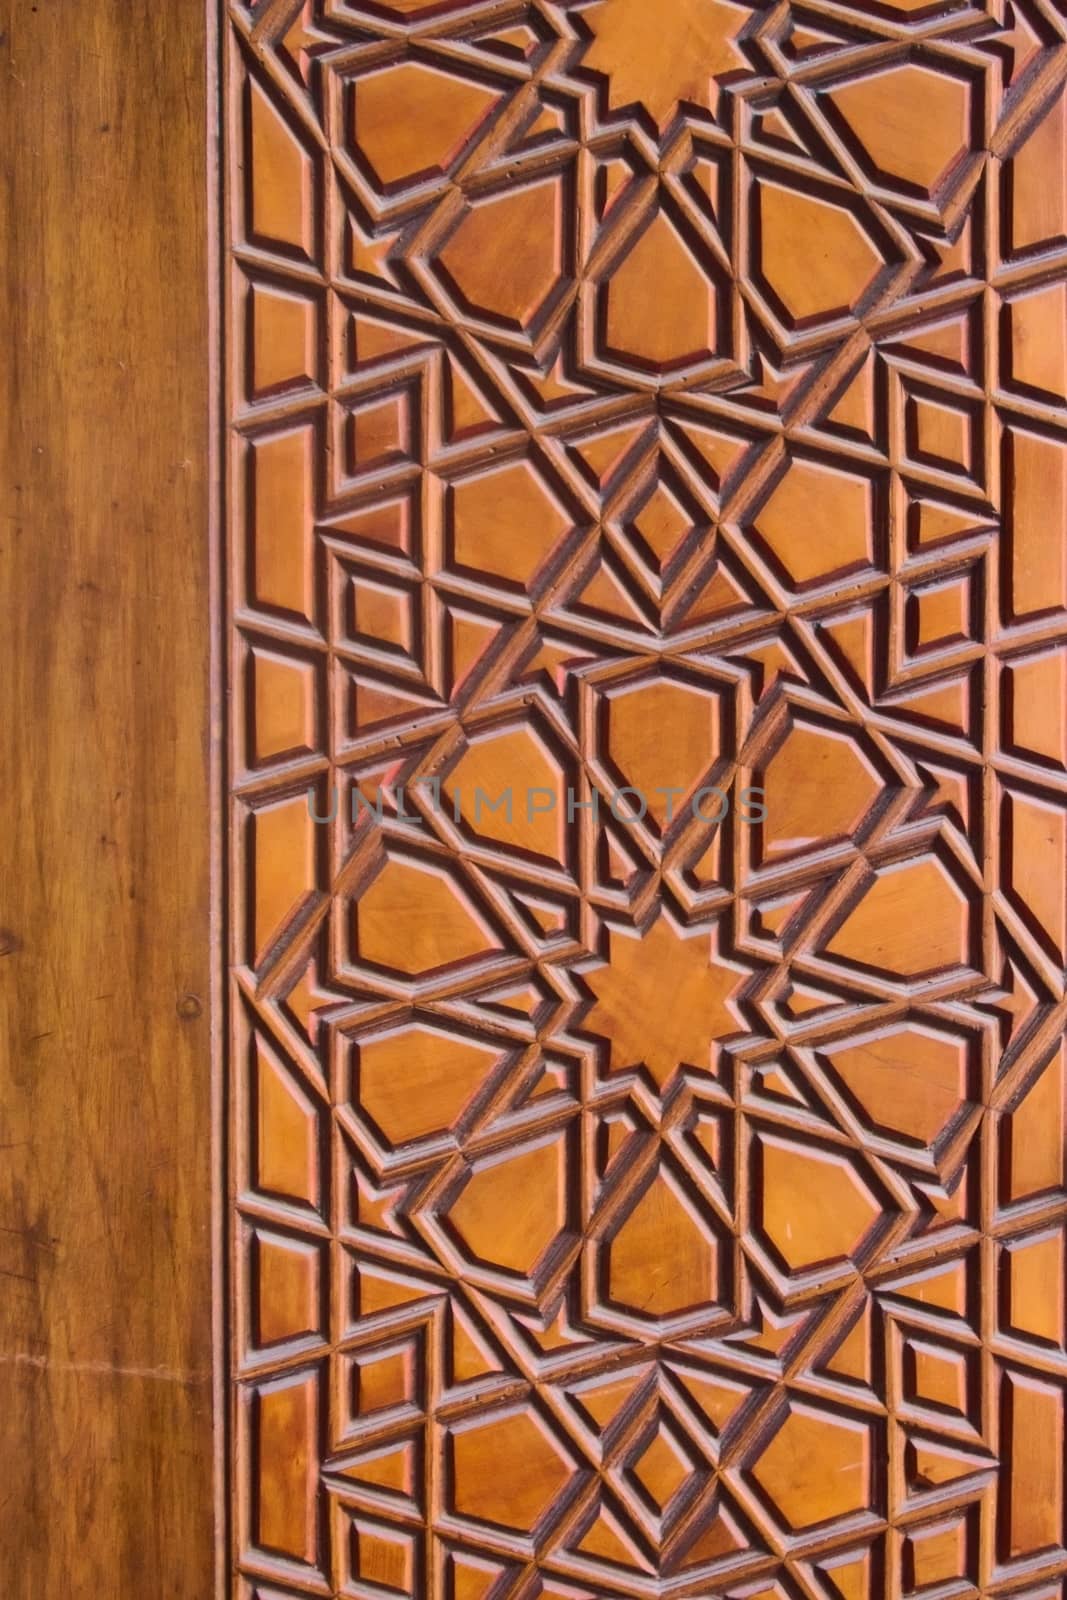 Geometrical pattern on a wooden door at a the Sehzade Mosque in Istanbul, Turkey. Islamic art, woodwork, detail close up. by hernan_hyper